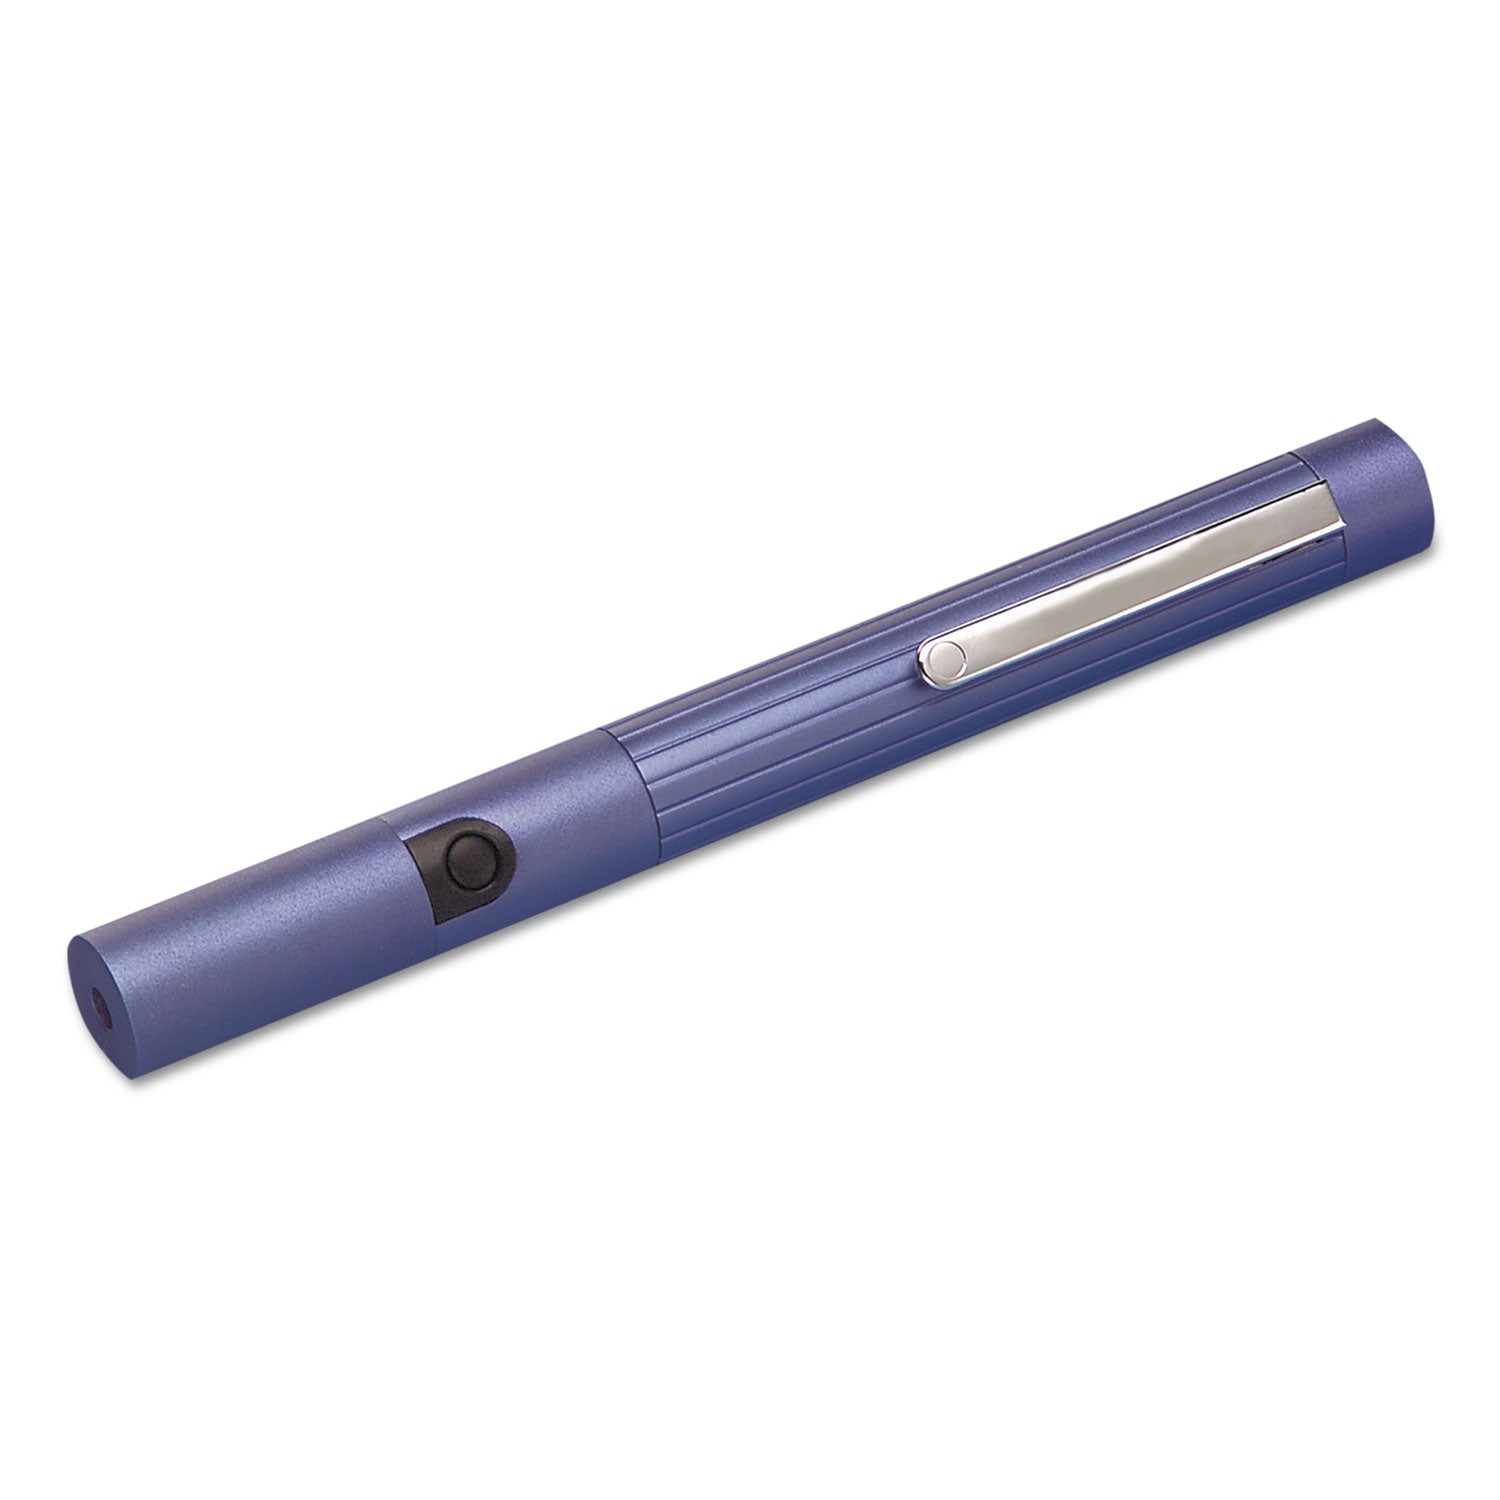 general-purpose-laser-pointer-class-3a-projects-1148-ft-metallic-blue_qrtmp1650q - 1